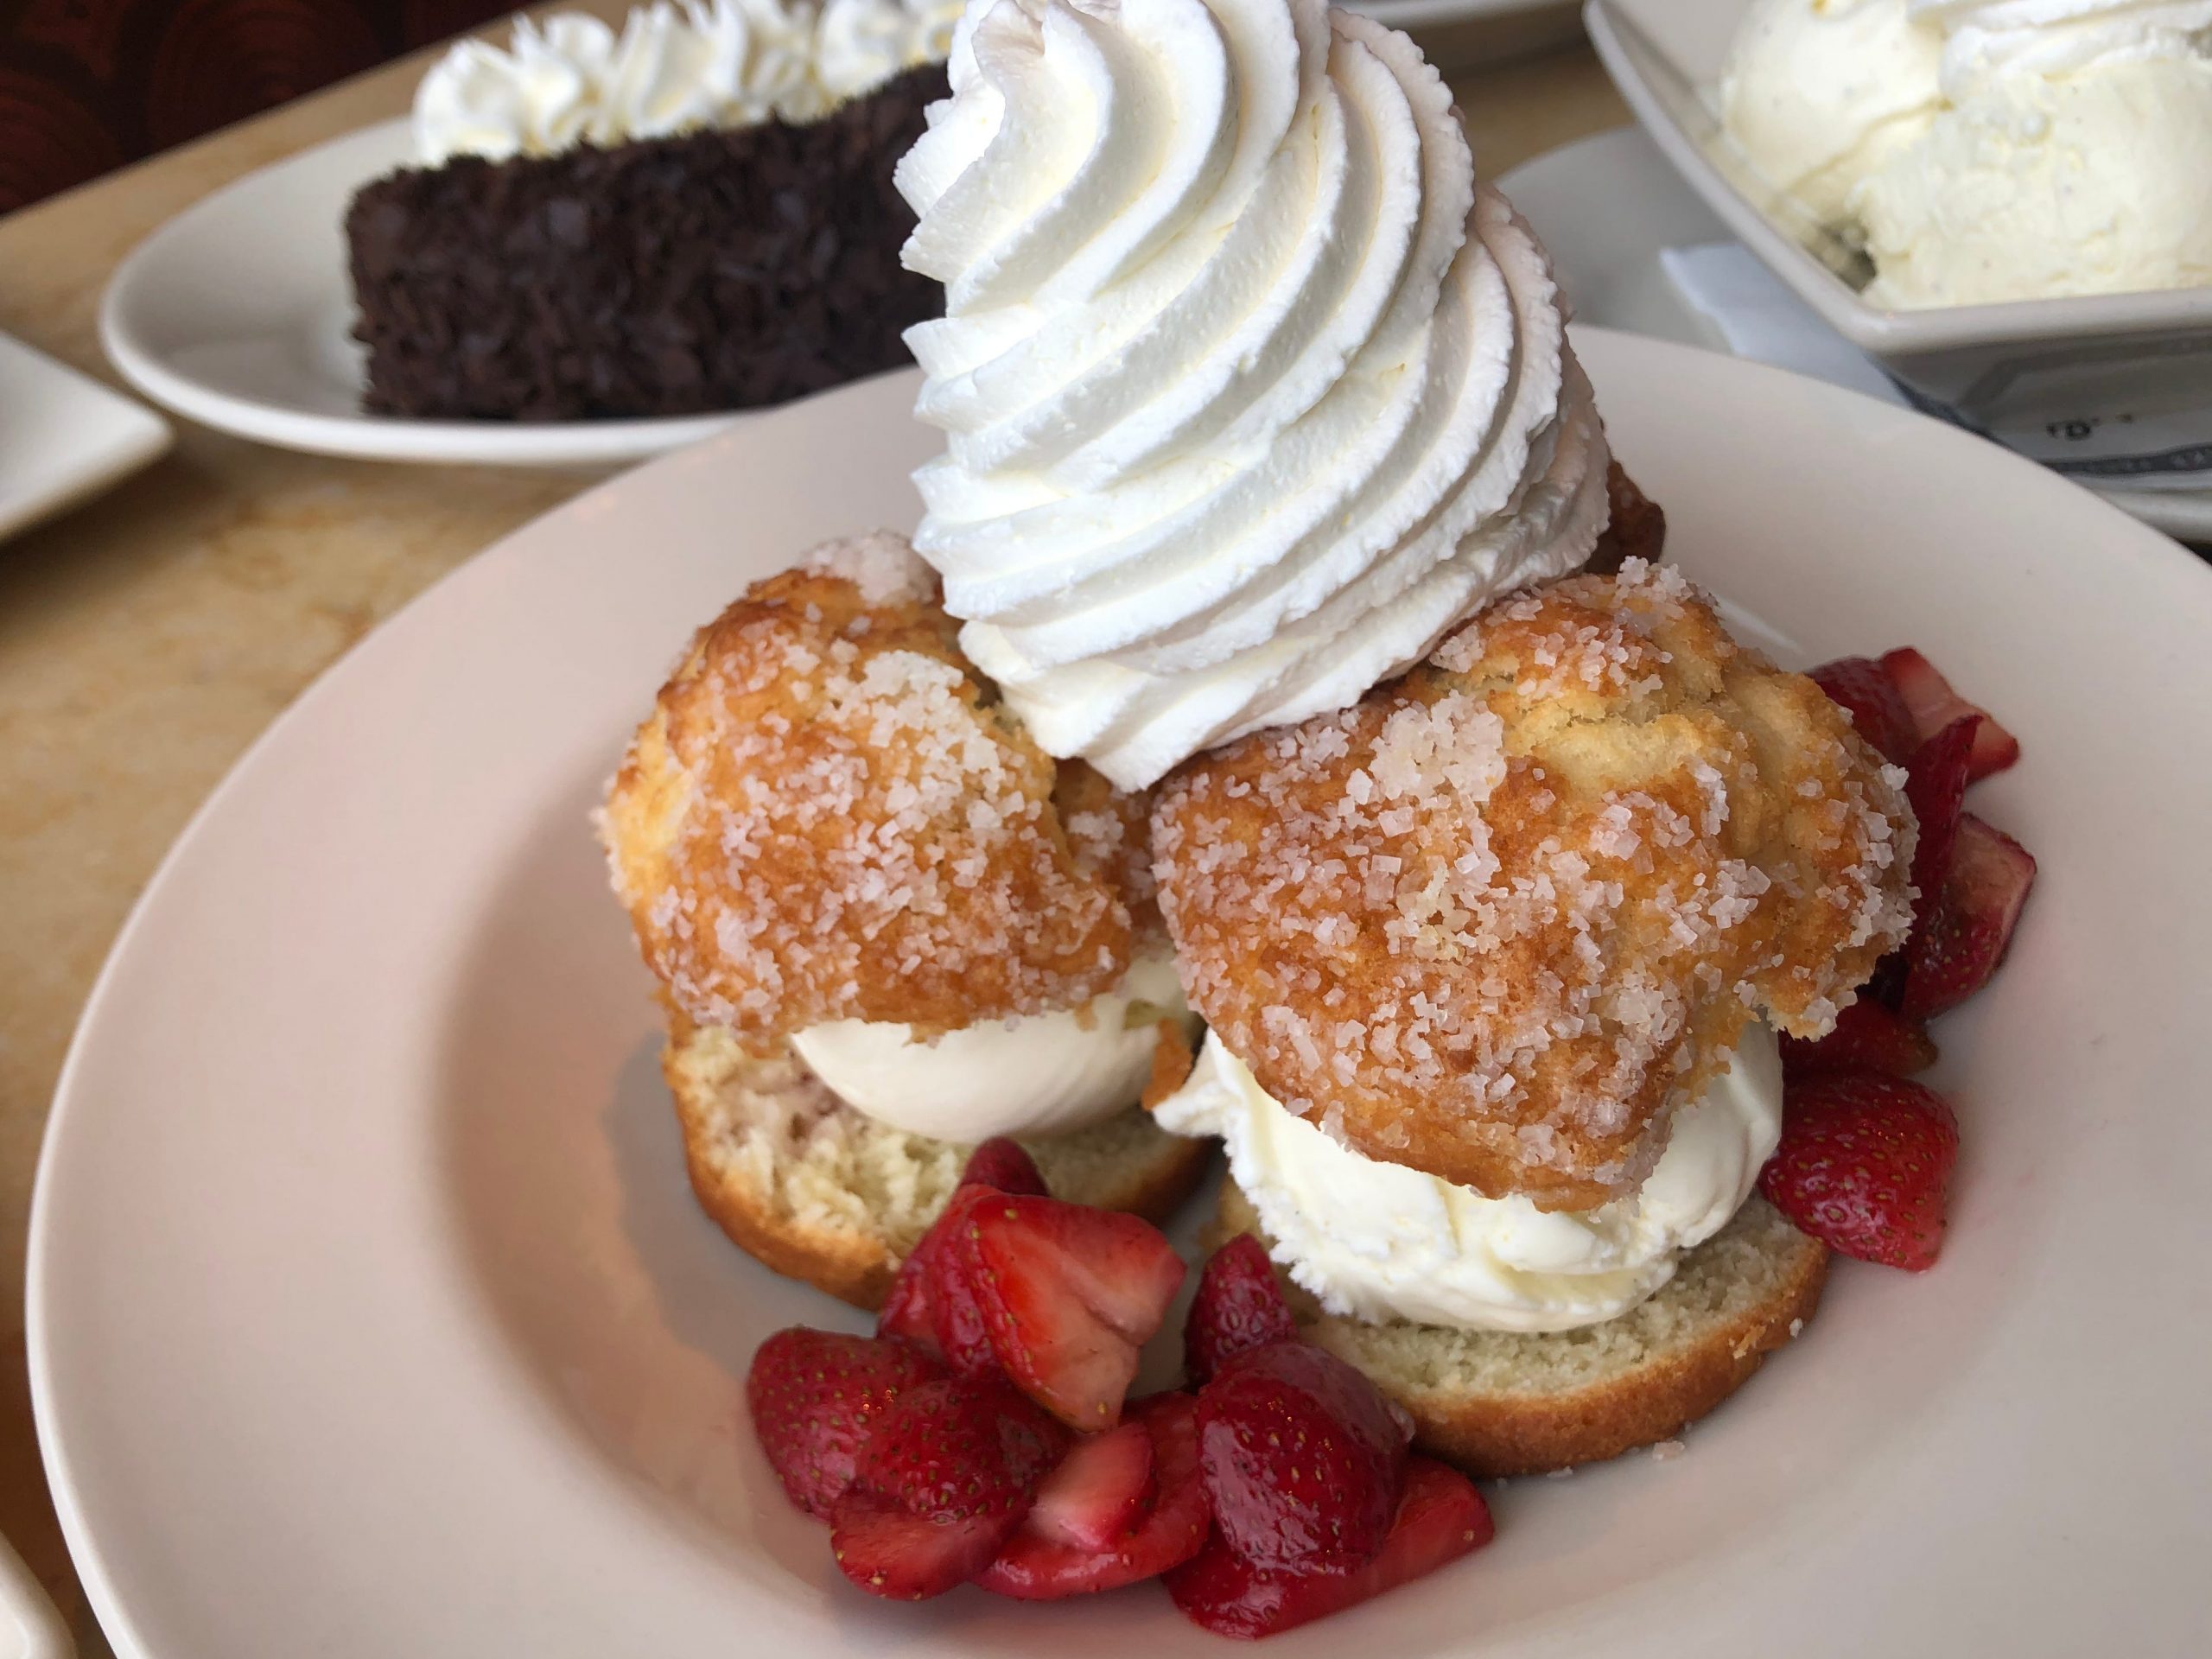 I tried every non-cheesecake dessert at The Cheesecake Factory, and I never would've thought to ...